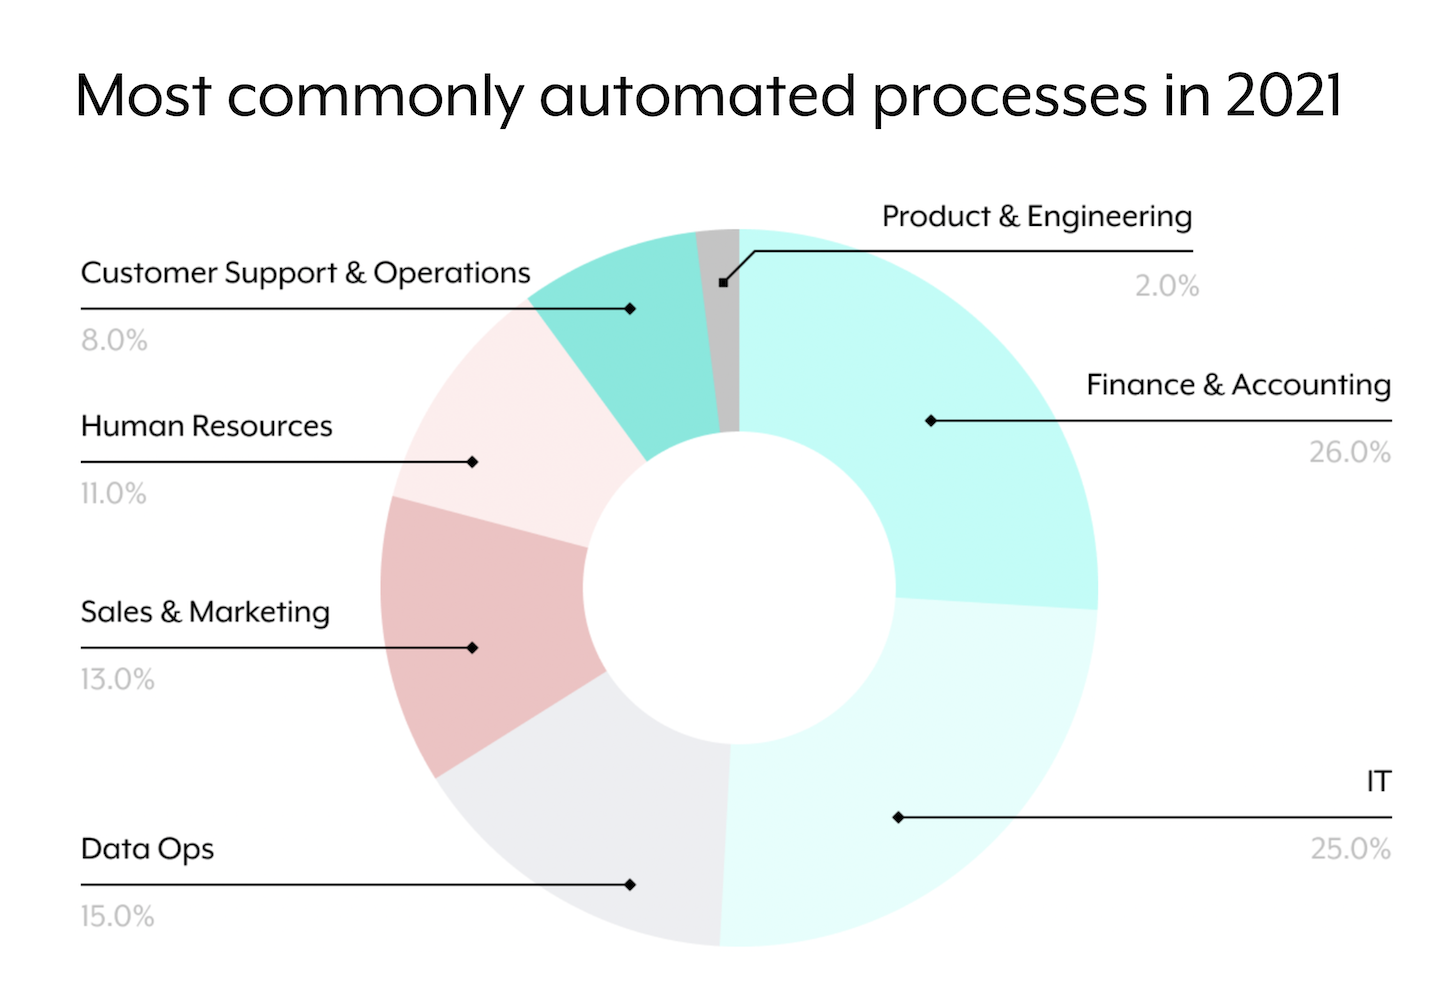 Which departments are automating the most?